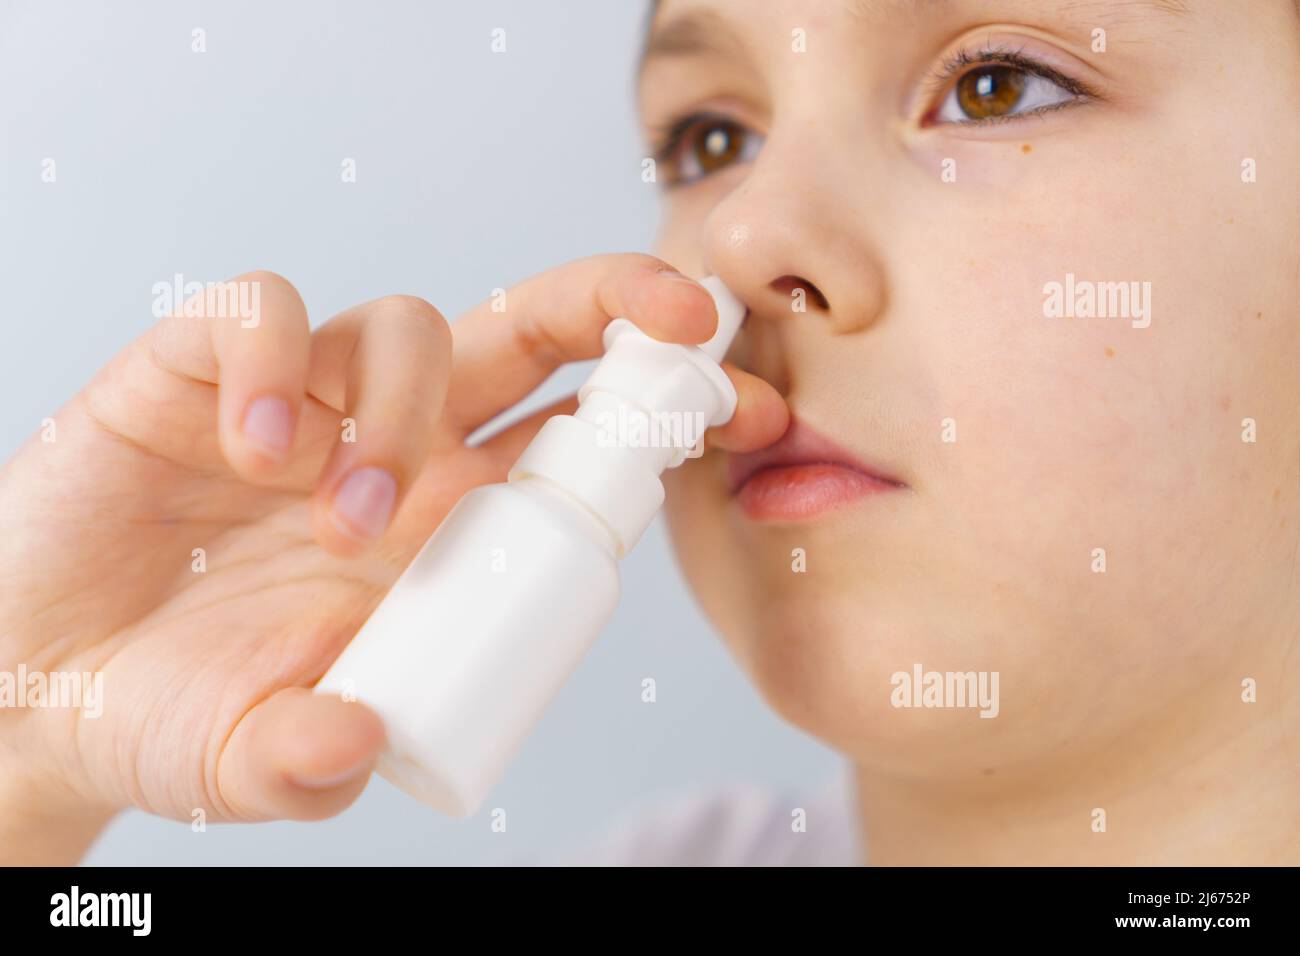 Little girl with runny nose does nasal spray irrigations to stop allergic rhinitis and sinusitis Stock Photo